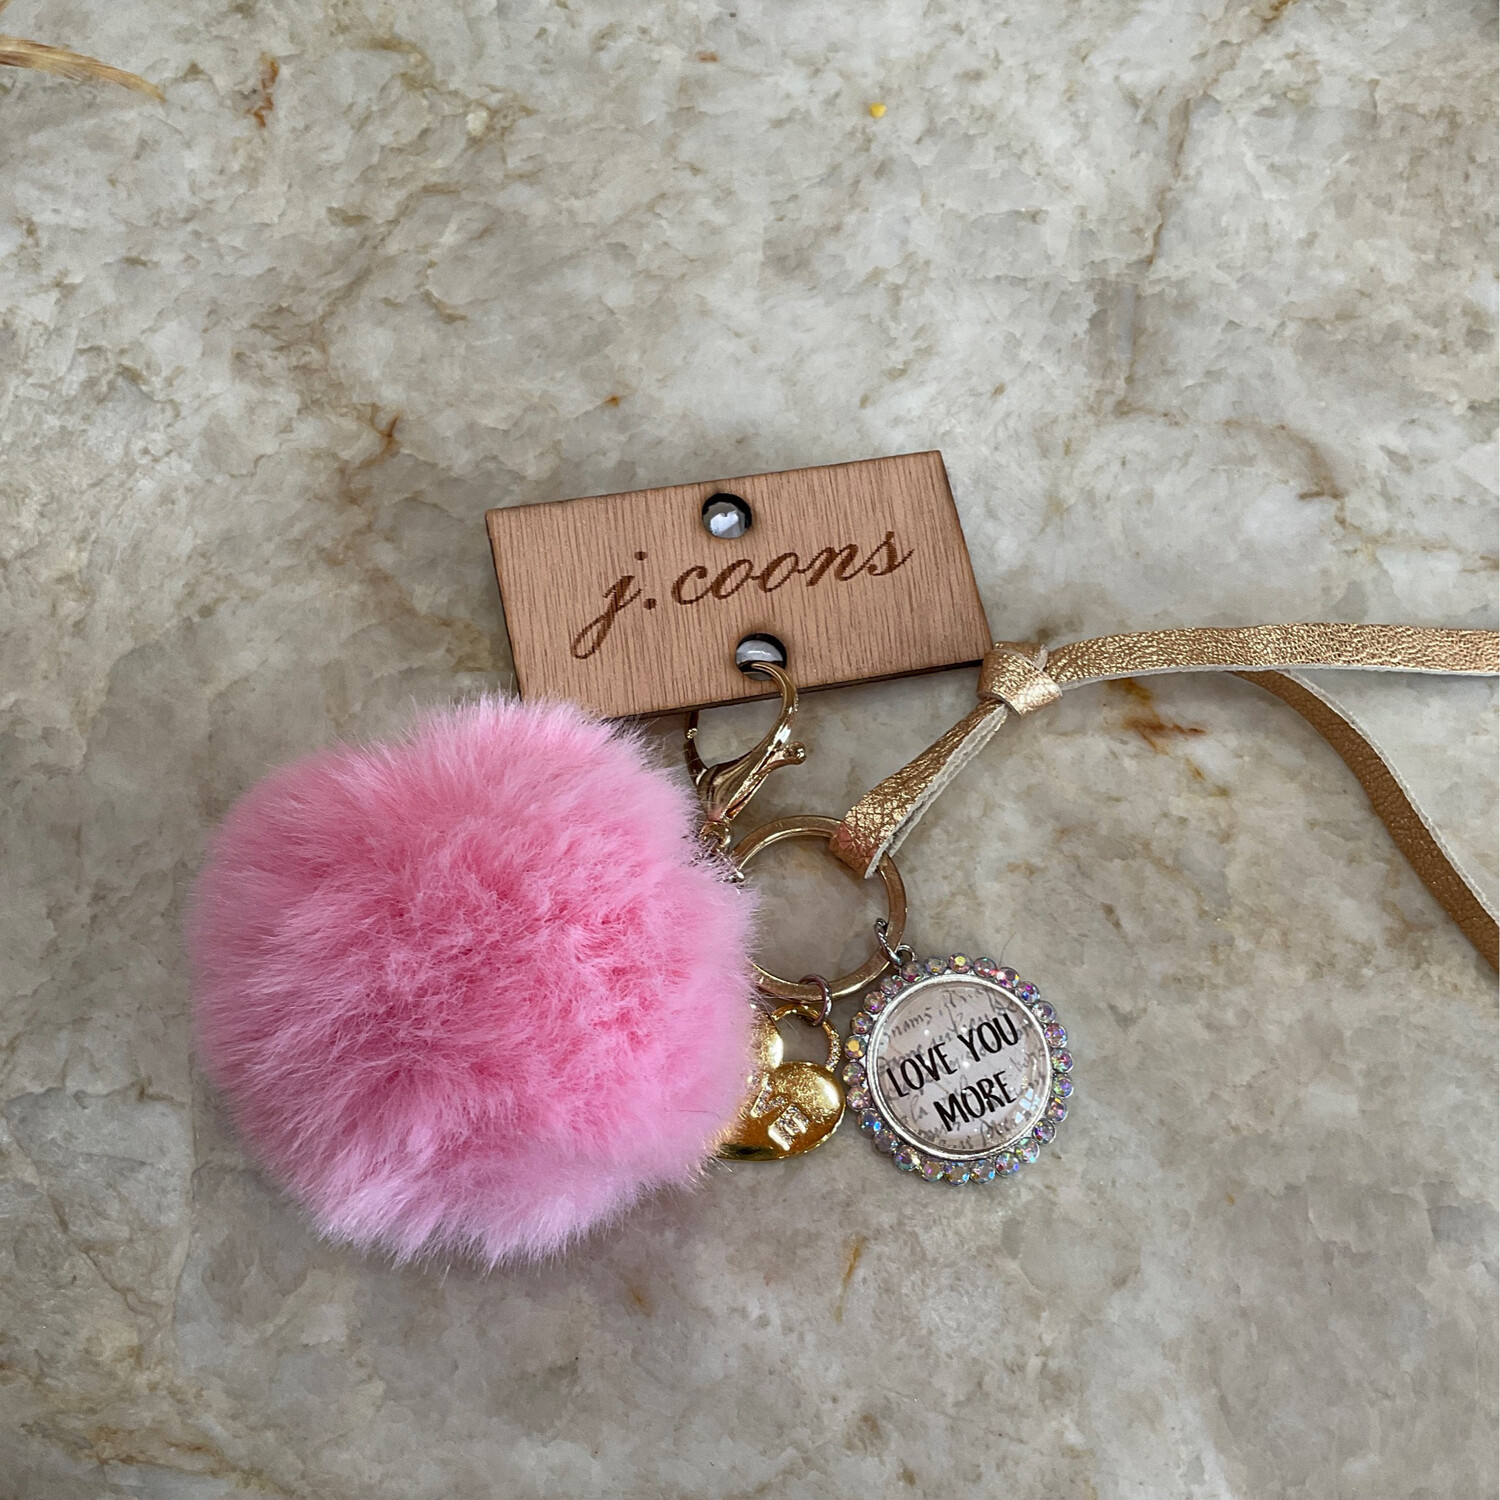 J Coons Pink Keychain Love You More Fur Ball 